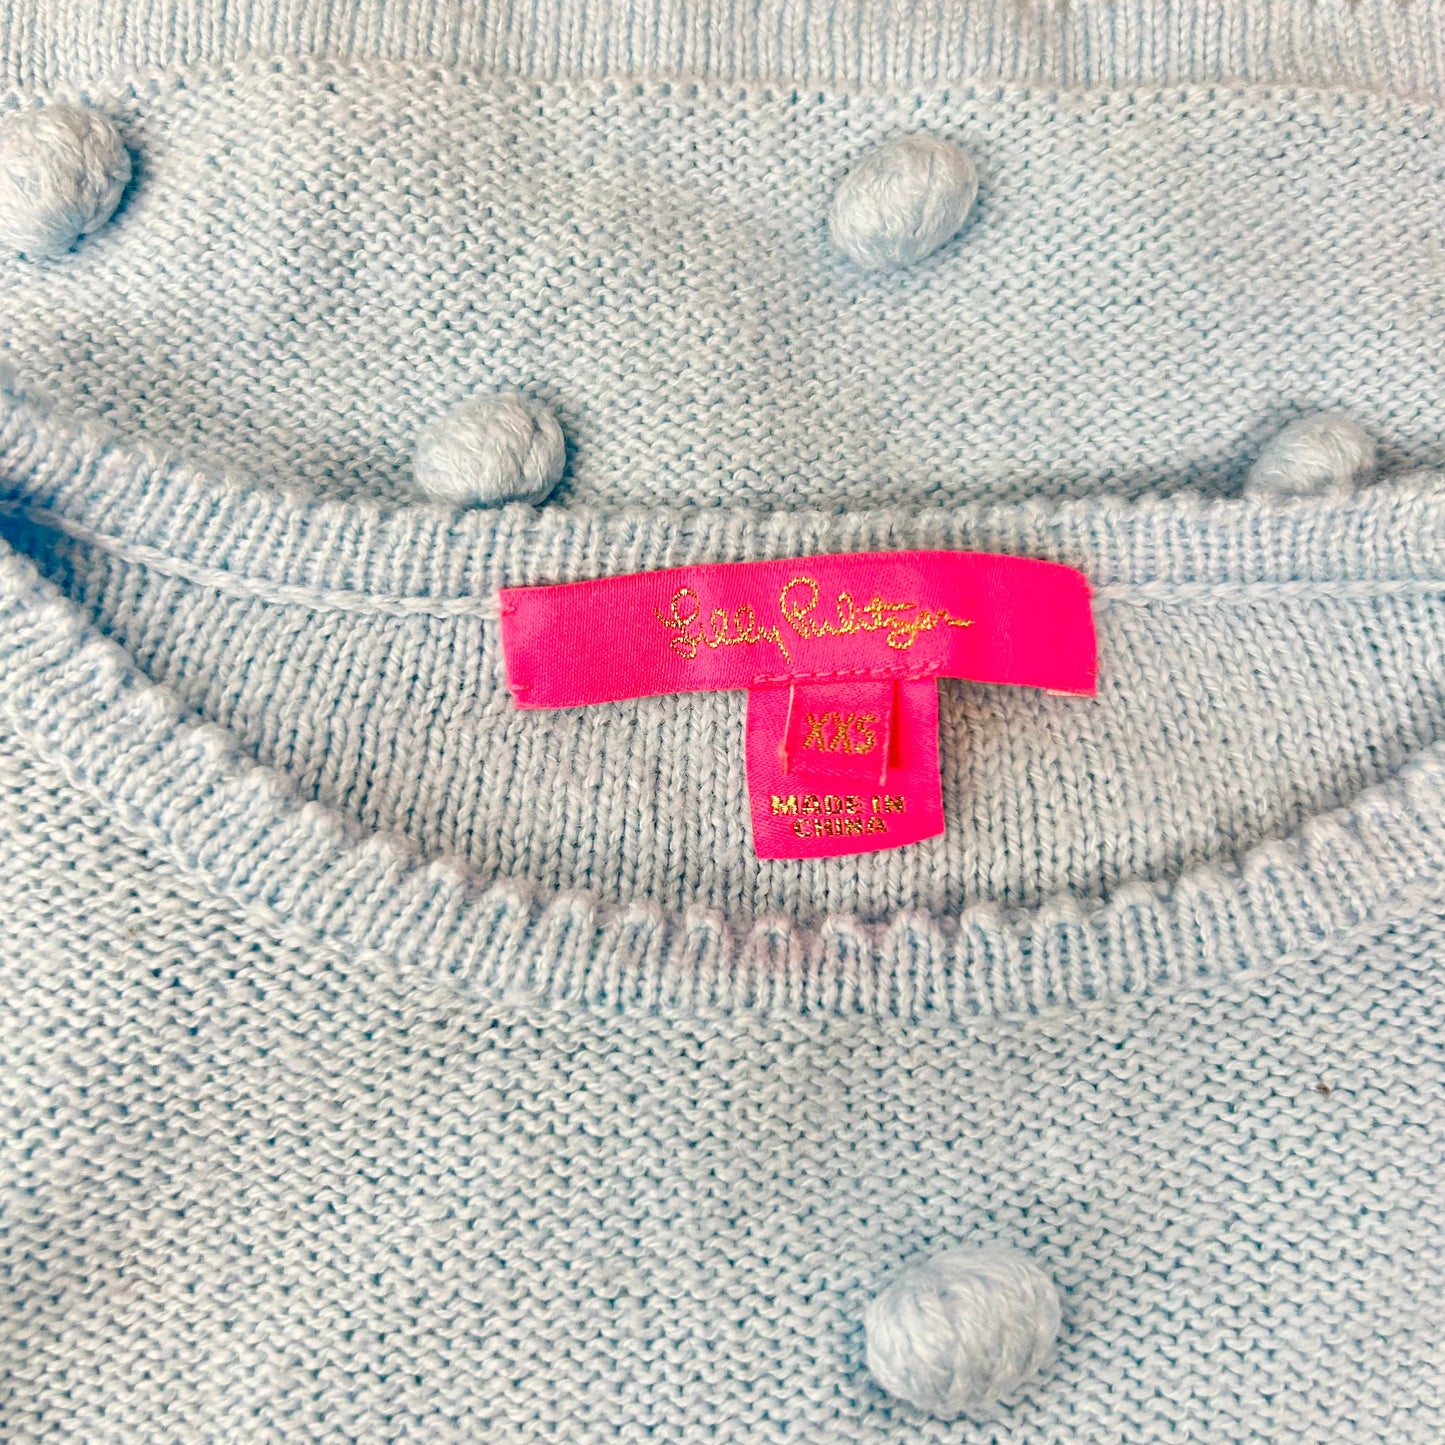 Blue Sweater Designer By Lilly Pulitzer, Size: Xxs